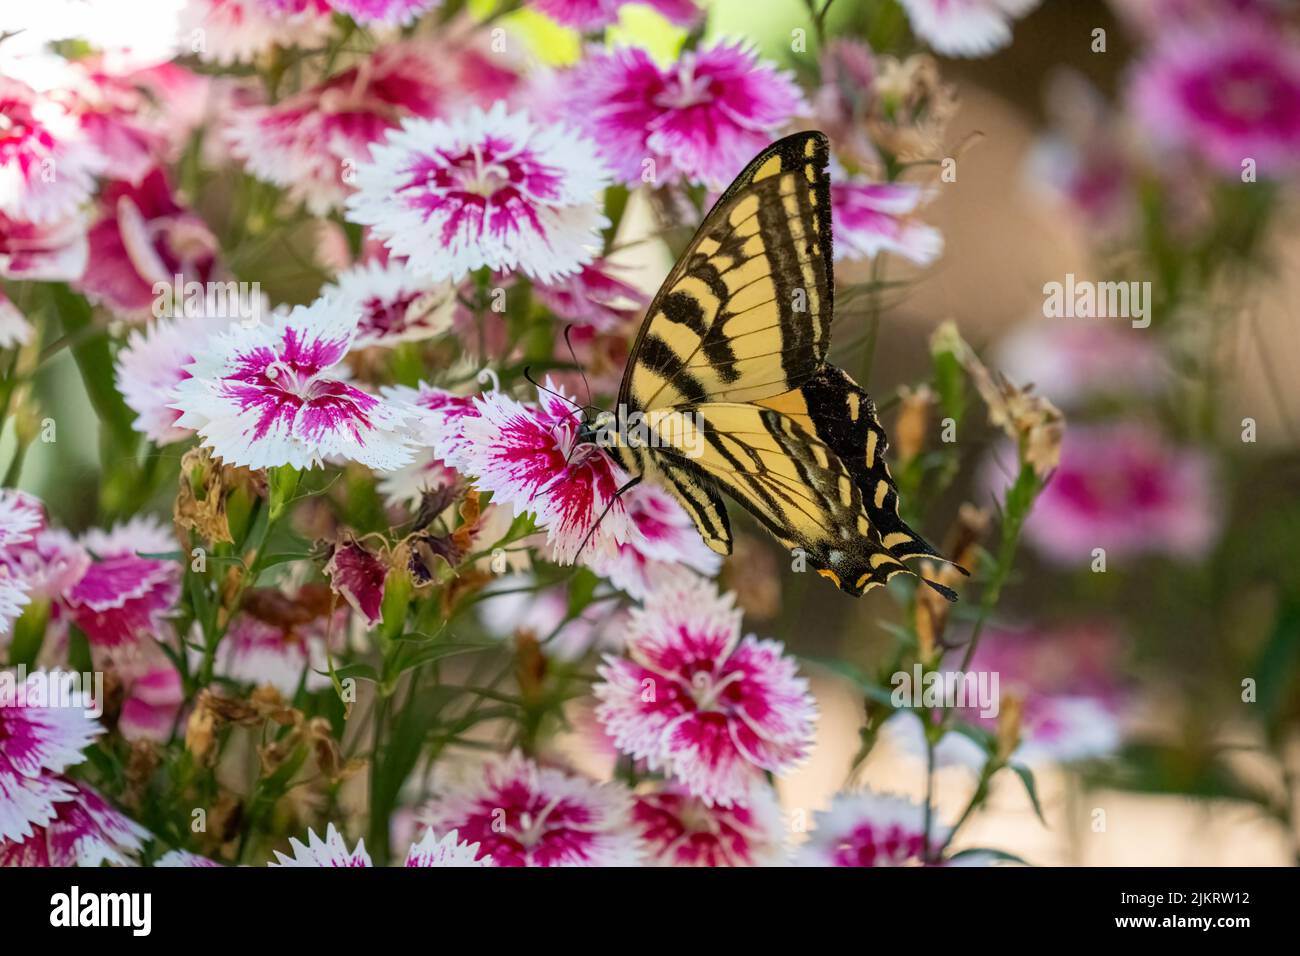 Issaquah, Washington, USA.   Western Tiger Swallowtail butterfly on Dianthus Floral Lace Picotee flowers. Stock Photo